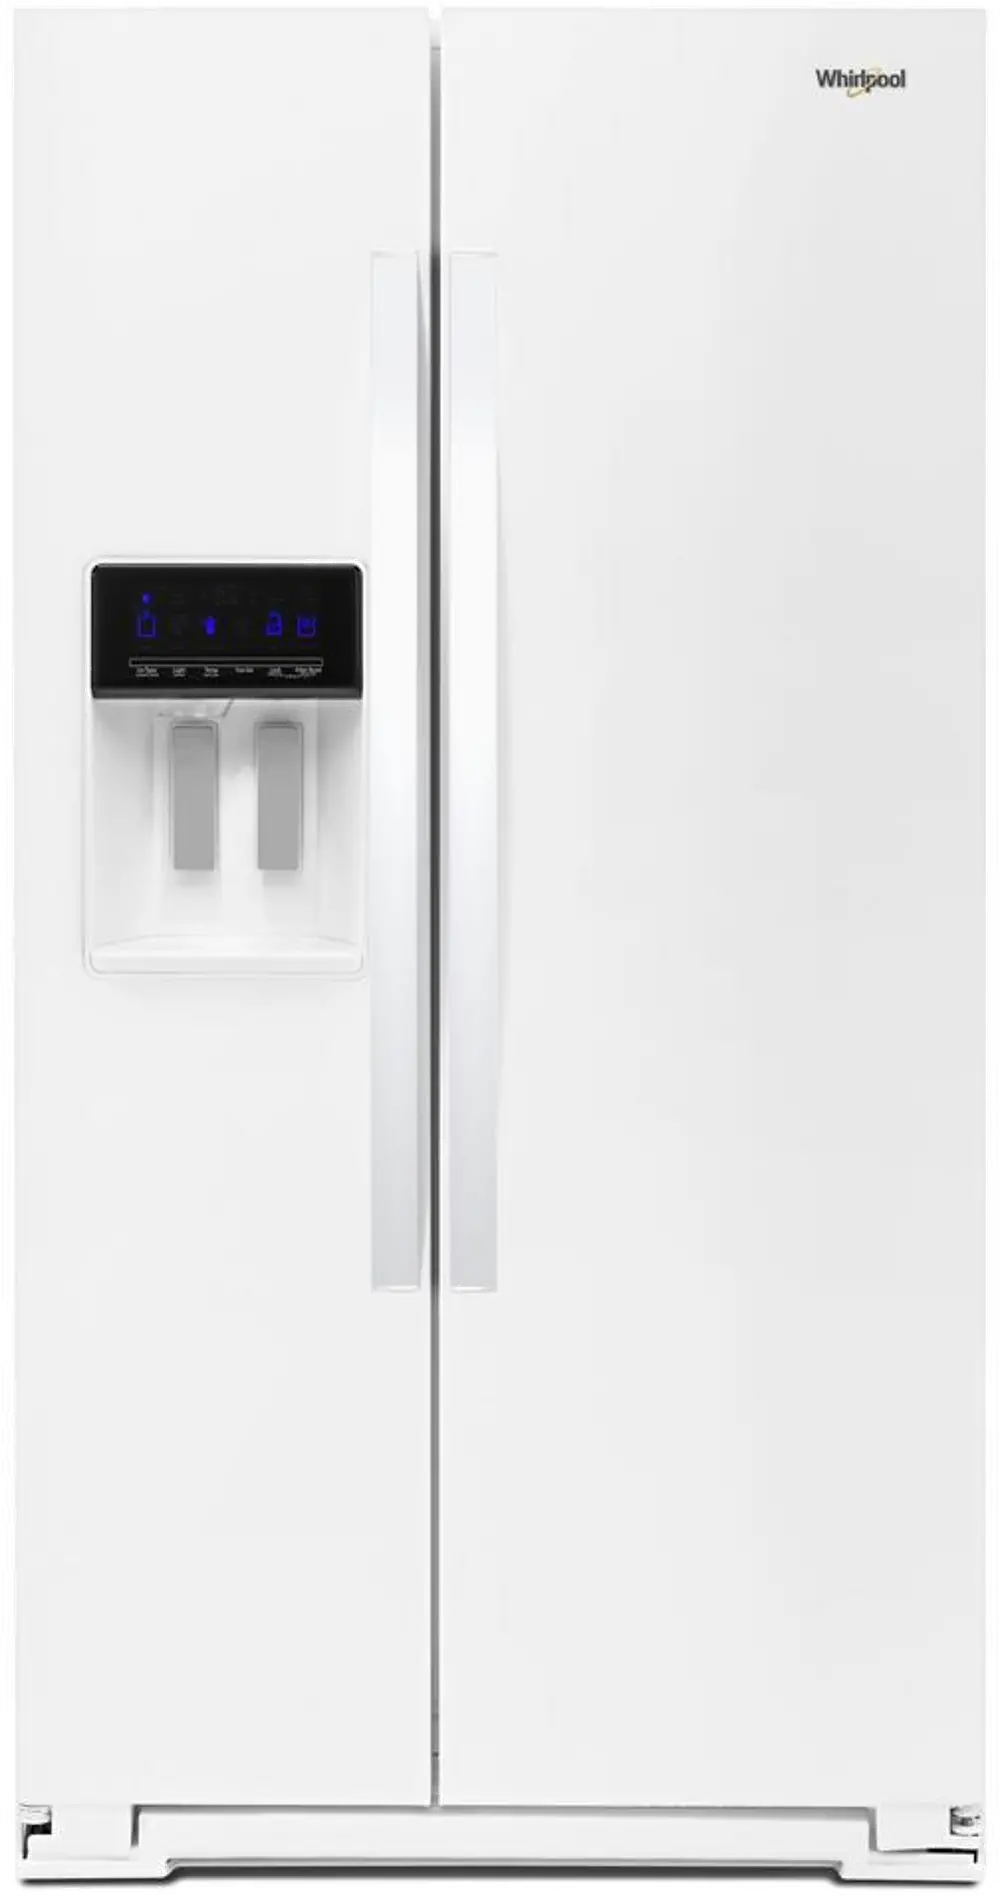 WRS588FIHW Whirlpool 28.5 cu ft Side by Side Refrigerator - White-1